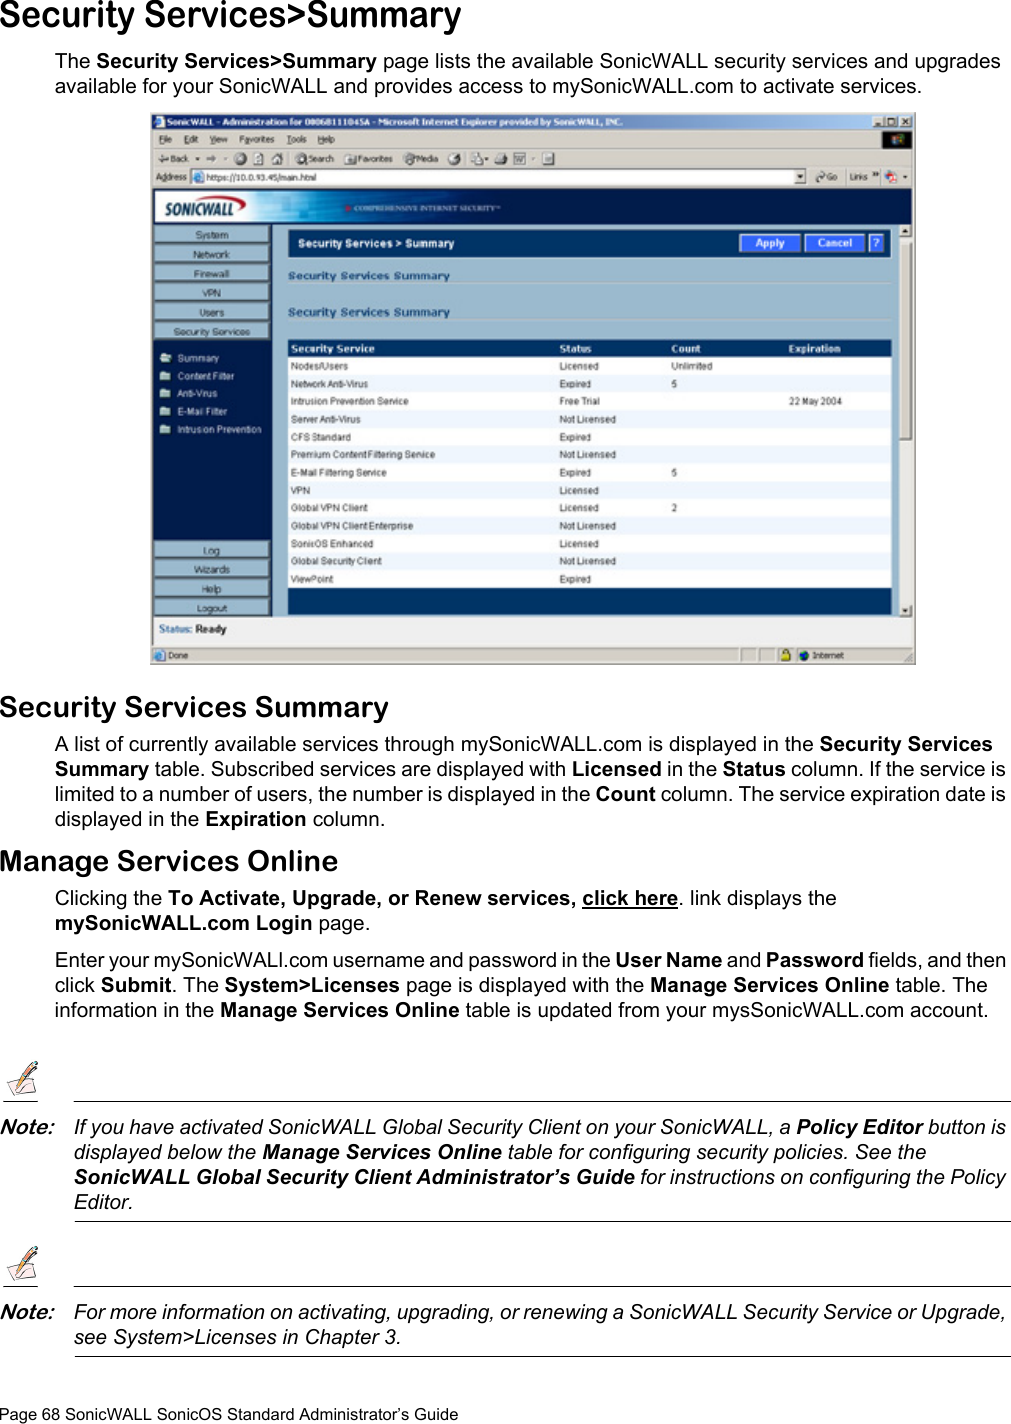 Page 68 SonicWALL SonicOS Standard Administrator’s GuideSecurity Services&gt;SummaryThe Security Services&gt;Summary page lists the available SonicWALL security services and upgrades available for your SonicWALL and provides access to mySonicWALL.com to activate services.Security Services SummaryA list of currently available services through mySonicWALL.com is displayed in the Security Services Summary table. Subscribed services are displayed with Licensed in the Status column. If the service is limited to a number of users, the number is displayed in the Count column. The service expiration date is displayed in the Expiration column. Manage Services OnlineClicking the To Activate, Upgrade, or Renew services, click here. link displays the mySonicWALL.com Login page. Enter your mySonicWALl.com username and password in the User Name and Password fields, and then click Submit. The System&gt;Licenses page is displayed with the Manage Services Online table. The information in the Manage Services Online table is updated from your mysSonicWALL.com account.Note:If you have activated SonicWALL Global Security Client on your SonicWALL, a Policy Editor button is displayed below the Manage Services Online table for configuring security policies. See the SonicWALL Global Security Client Administrator’s Guide for instructions on configuring the Policy Editor.Note:For more information on activating, upgrading, or renewing a SonicWALL Security Service or Upgrade, see System&gt;Licenses in Chapter 3.